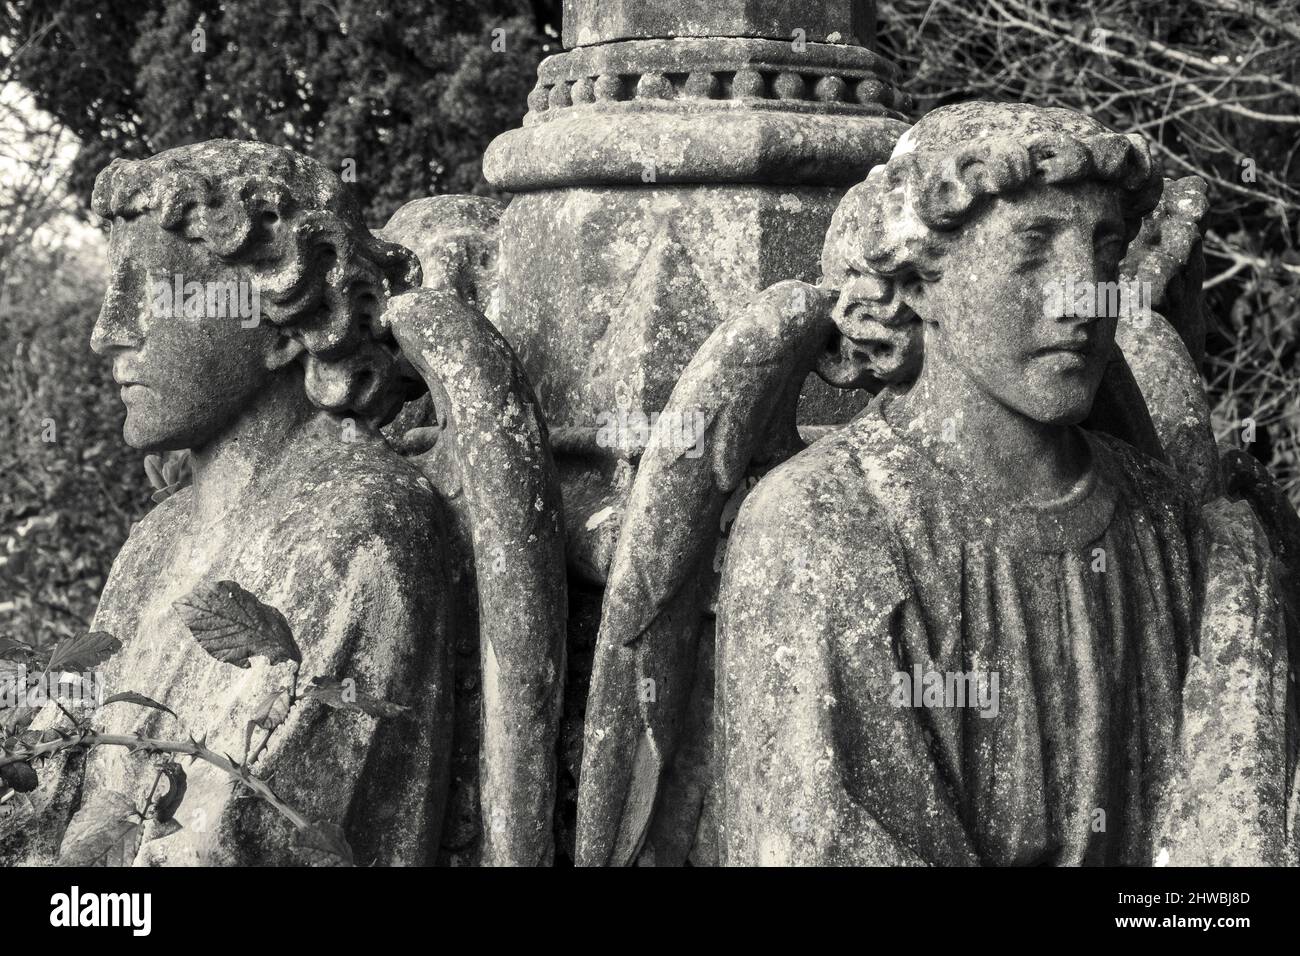 Four seated stone angels around a graveyard monument entwined with brambles Stock Photo